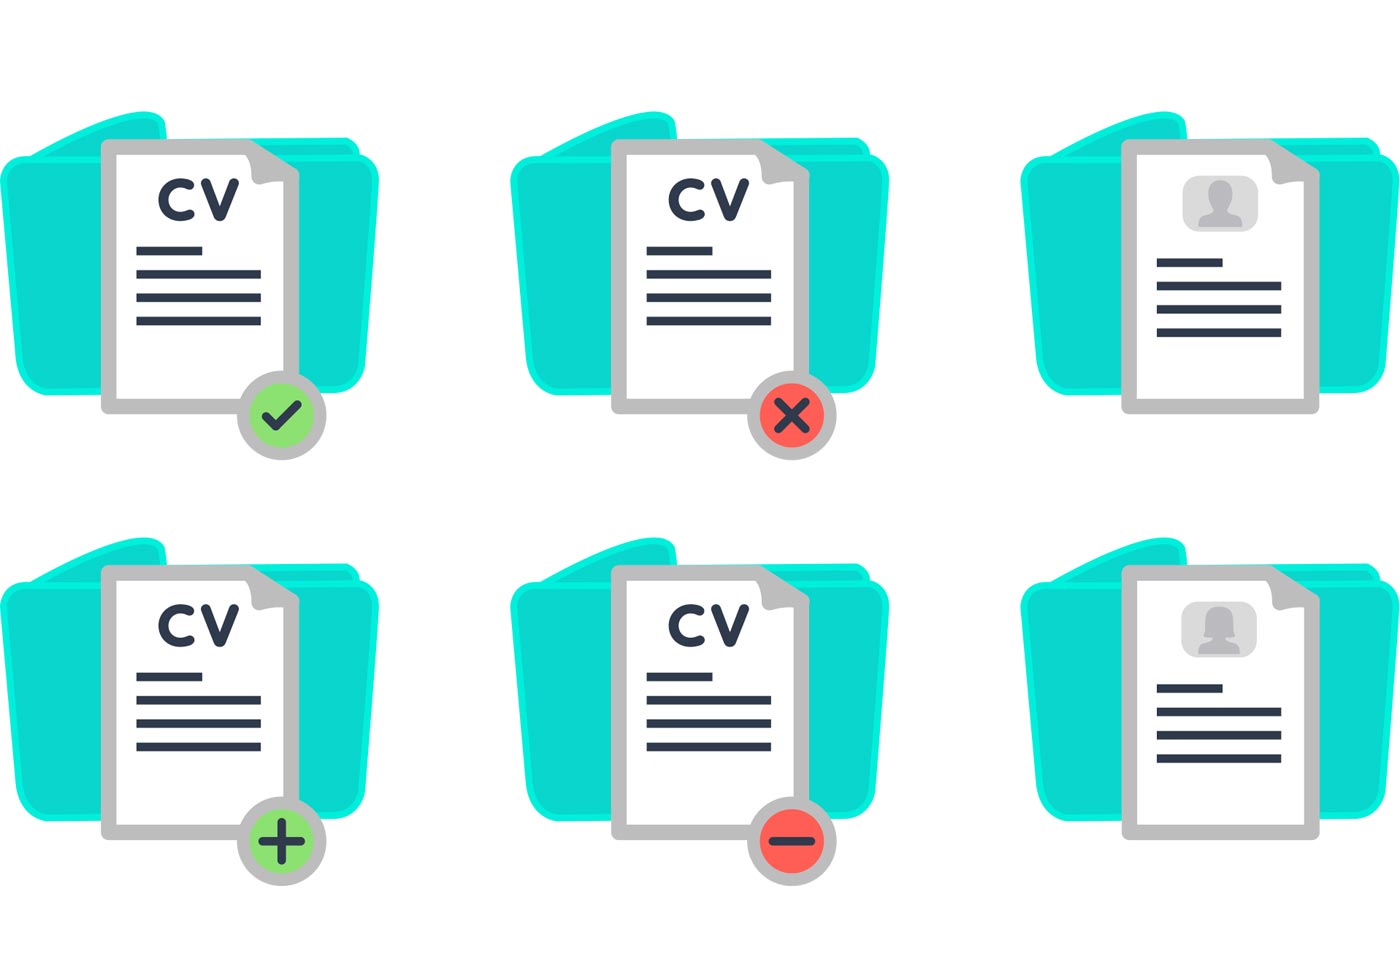 Curriculum Vitae And Folder Vector Icons Download Free Vector Art